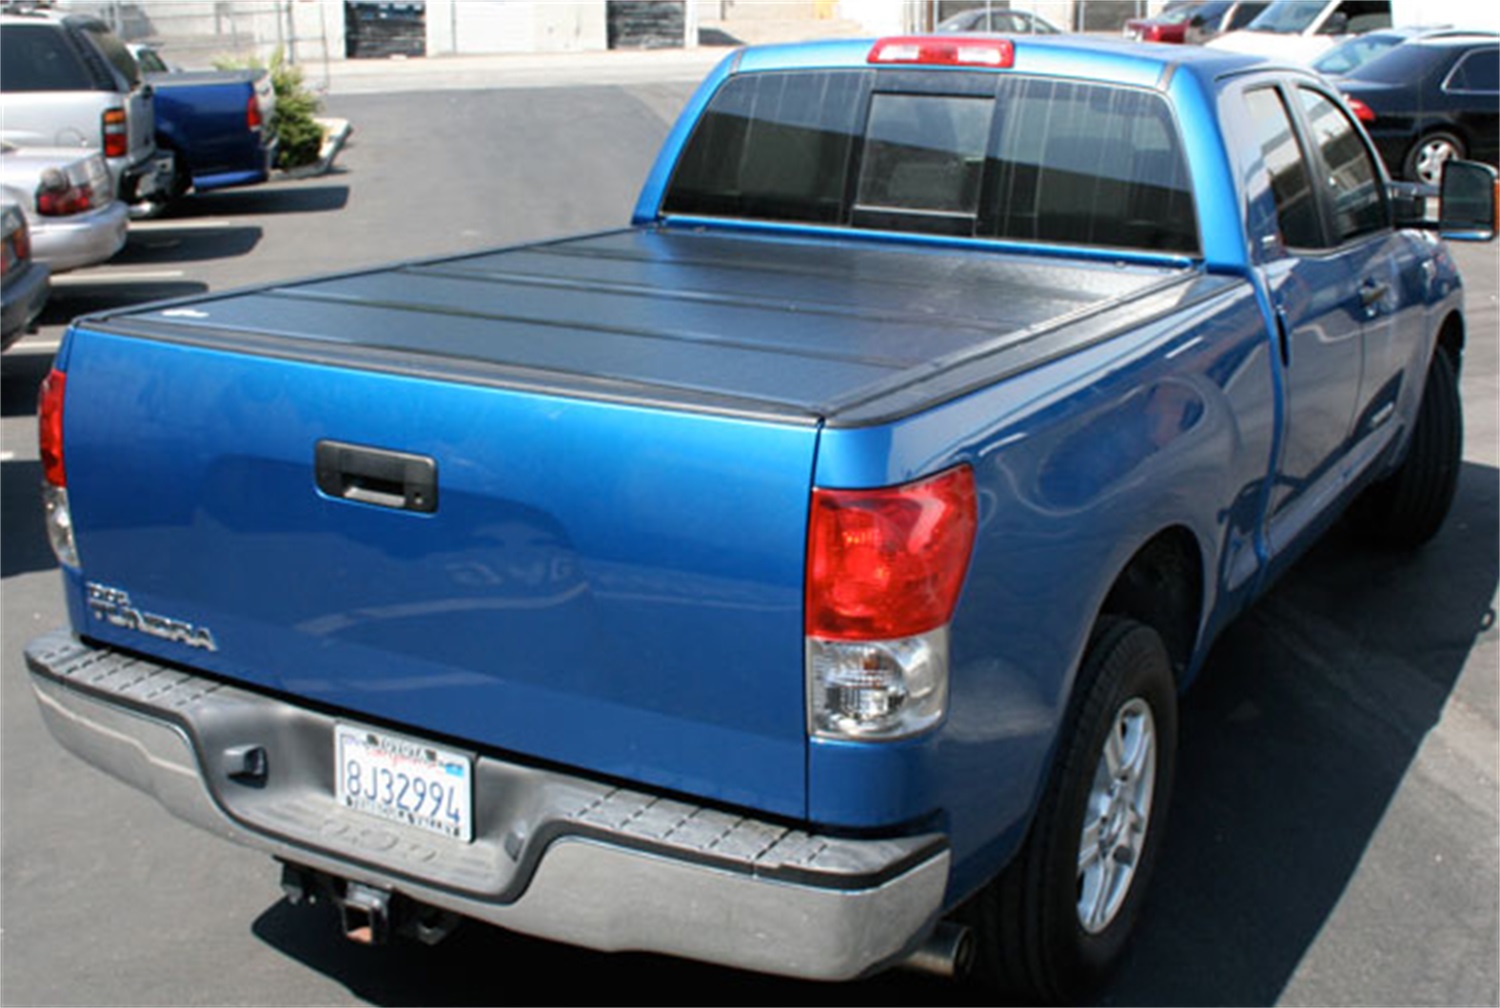 BAK Industries BAK Industries 35406 Truck Bed Cover Fits 05-15 Tacoma